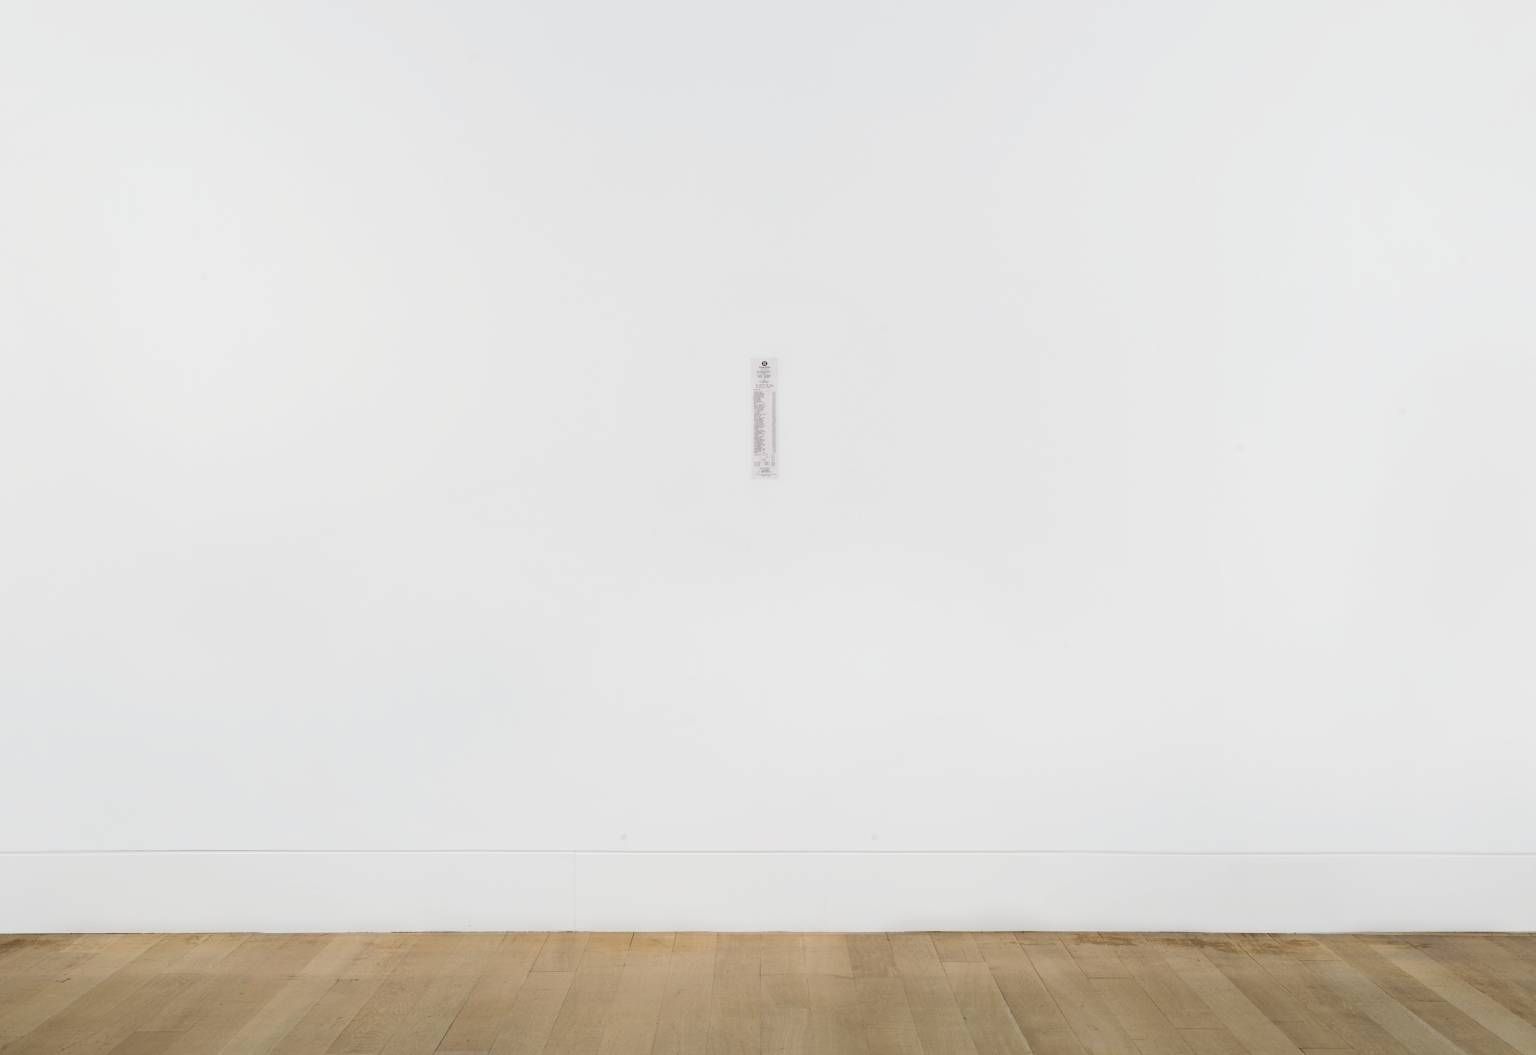 Monochrome Till Receipt (white)', Ceal Floyer, 1999 | Tate Pertaining To 2018 White Wall Art (View 17 of 20)